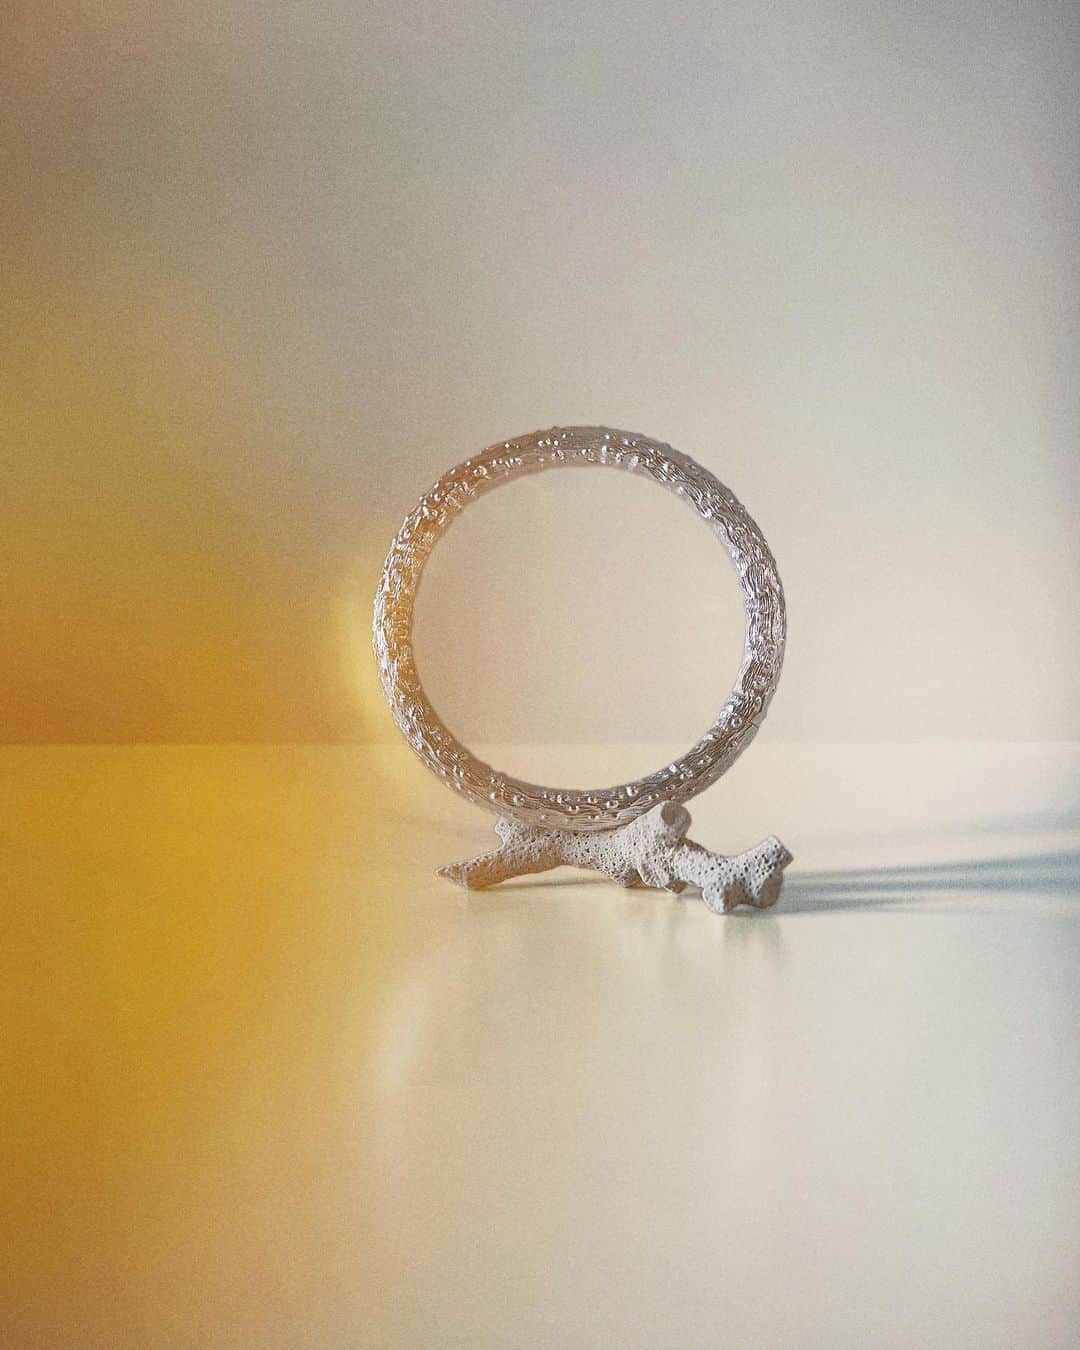 Monica Sordoのインスタグラム：「PERMANENCIA al SUR – The SS21 Collection – On View Now – “ARRECIFE” Collar Cuff .  “A design exploration of the tube sponges usually found in coral reefs in the Caribbean” .  〰️STILL LIFE SERIES BY〰️ CREATIVE DIRECTION @lialazaro / PHOTOGRAPHY @ivansalinero  .  Digital Showroom @si.collective / crystal@si-collective.com」